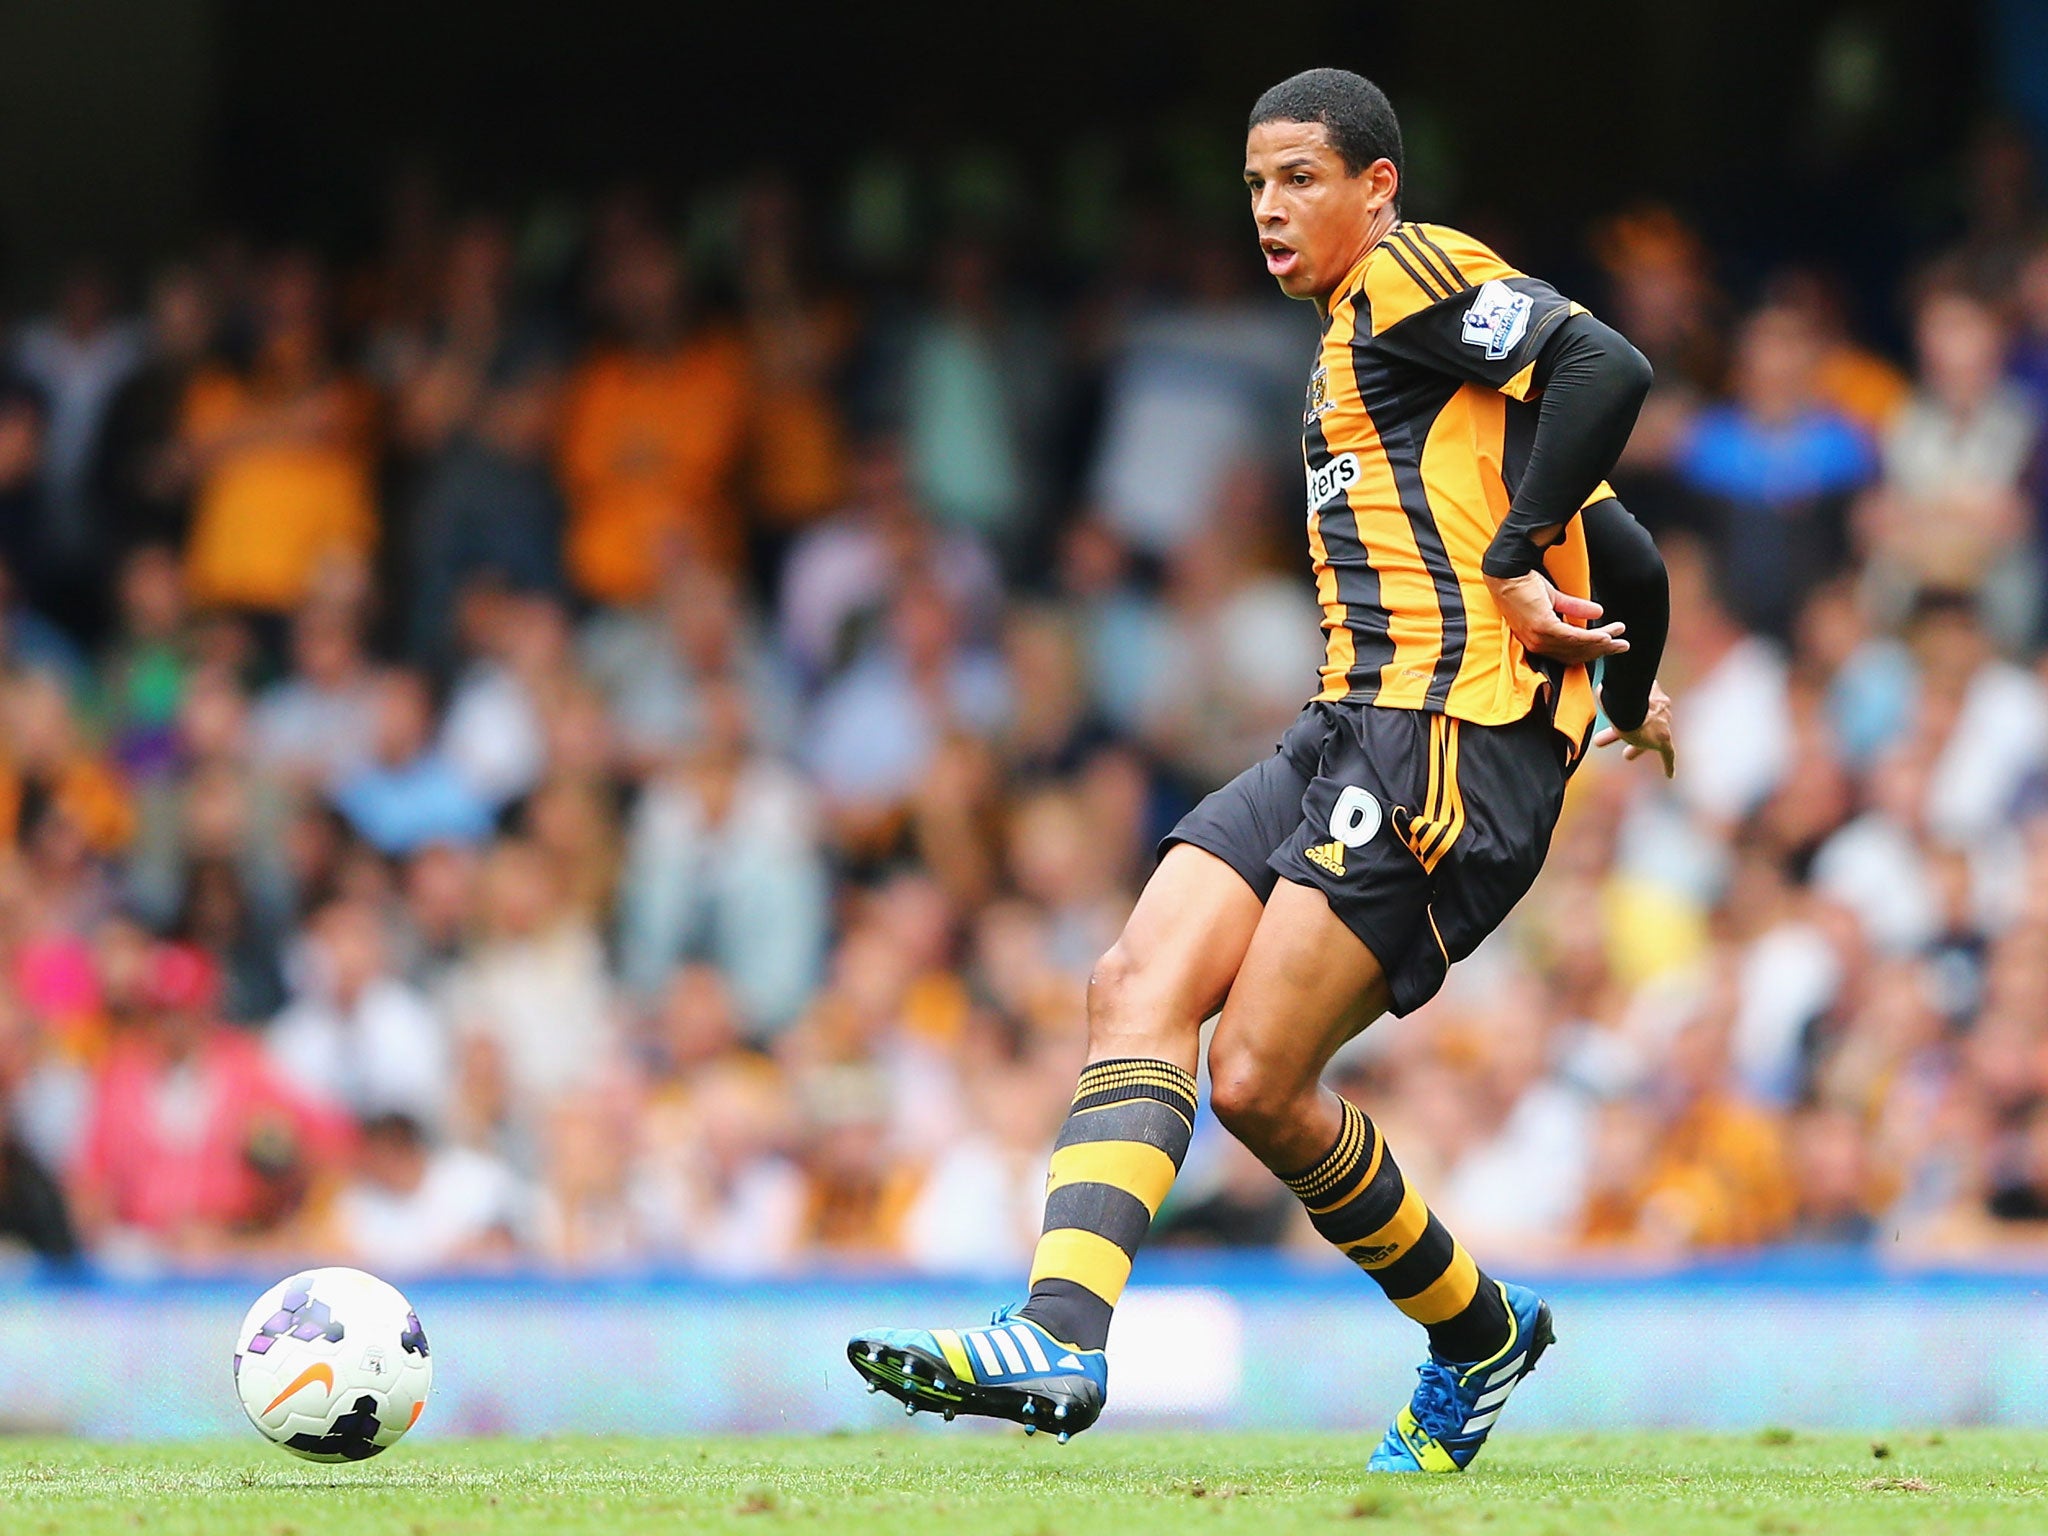 Hull City defender Curtis Davies has warned his team-mates that Swansea will be going all-out for victory in their Premier League clash